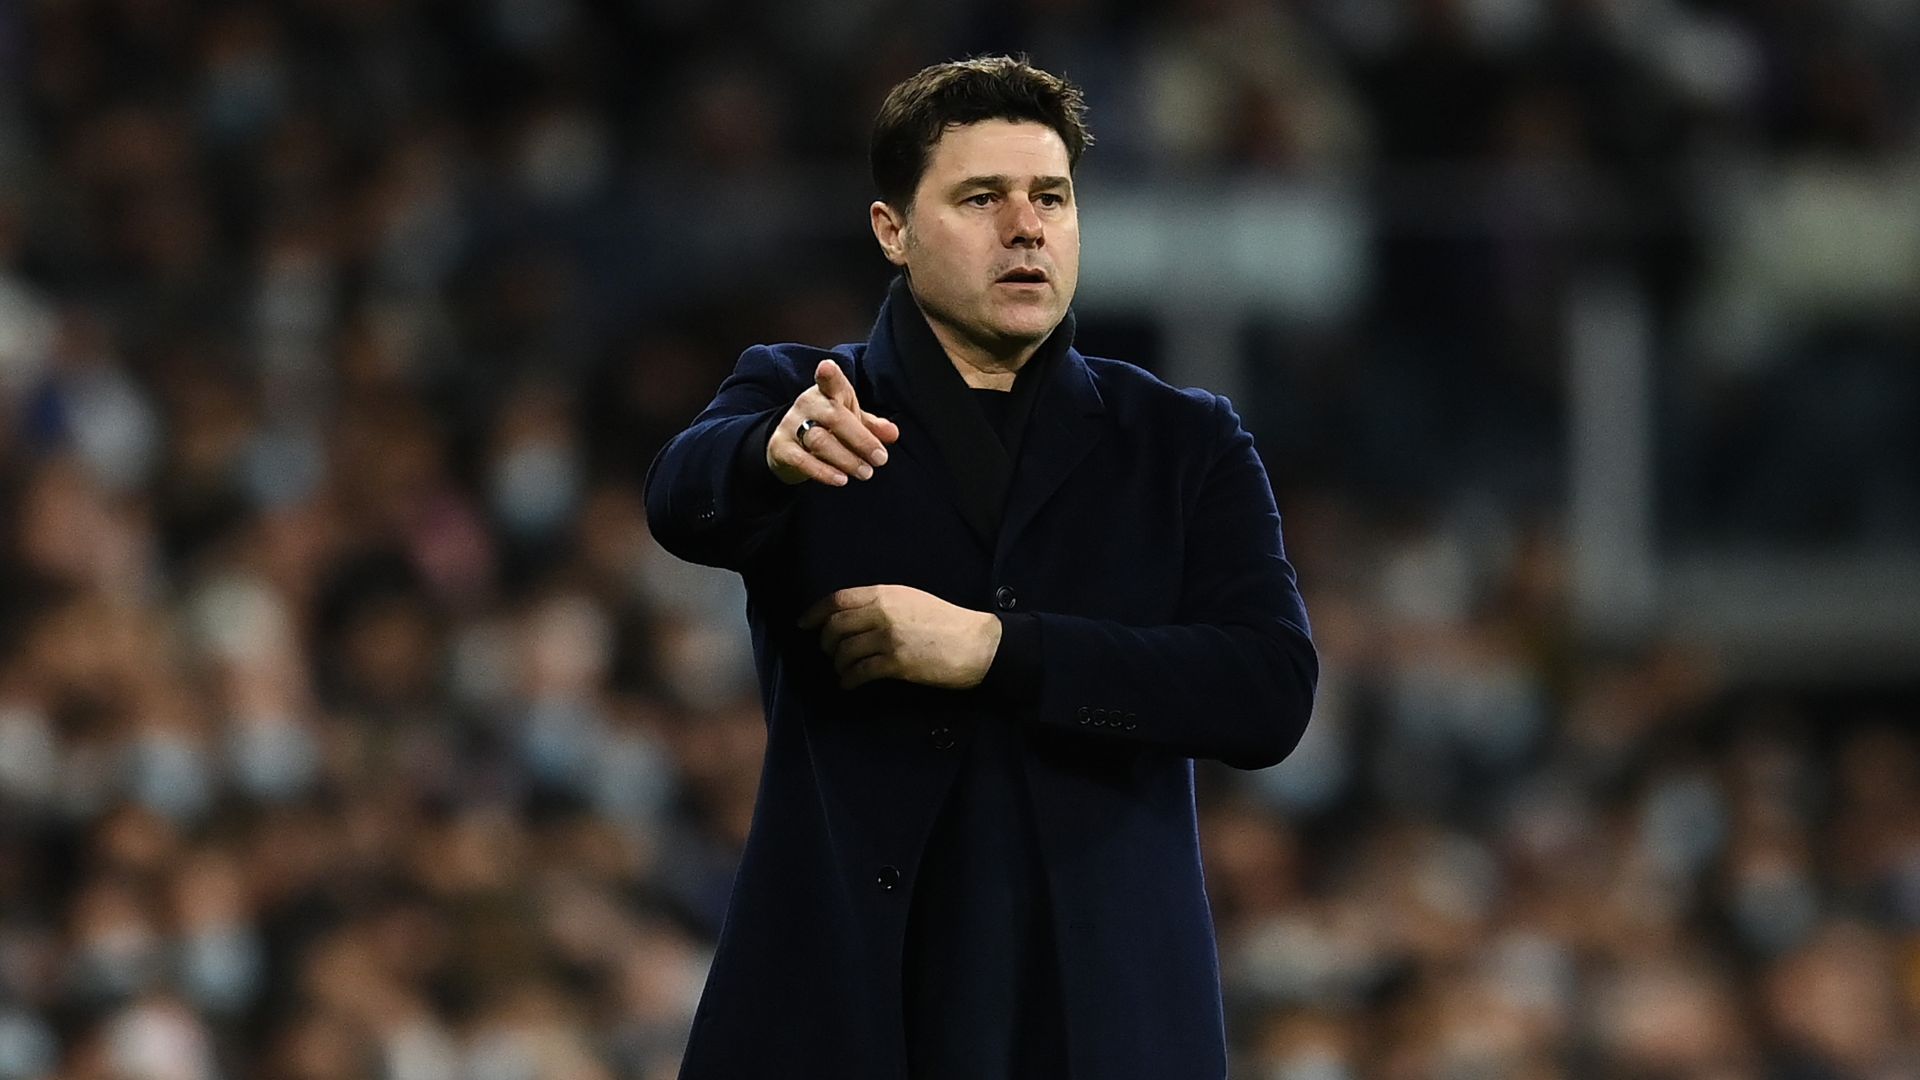 Pochettino is Chelsea's top target for managerial role